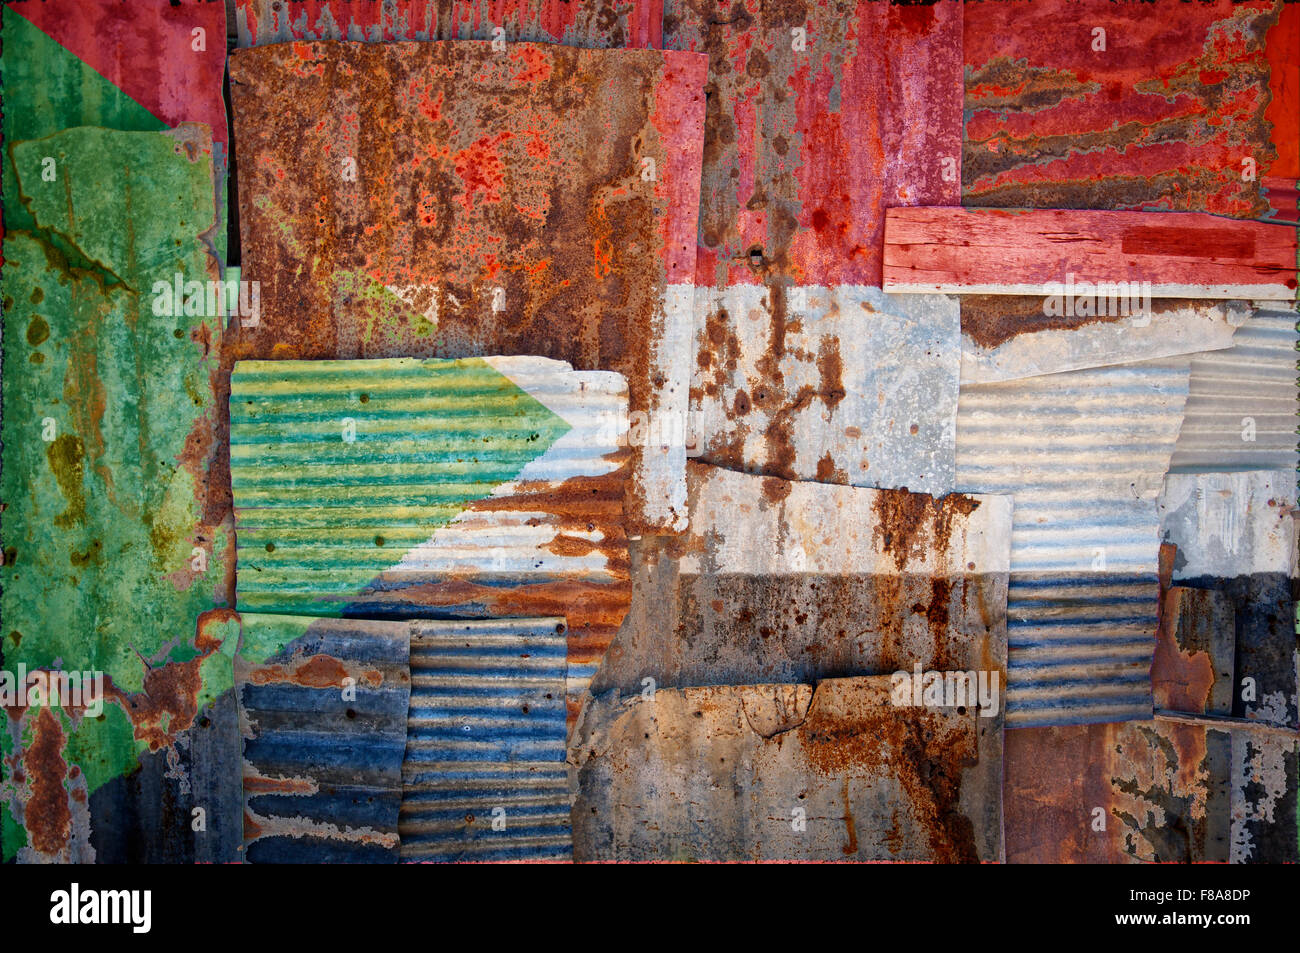 An abstract background image of the flag of Sudan painted on to rusty corrugated iron sheets overlapping to form a wall or fence Stock Photo